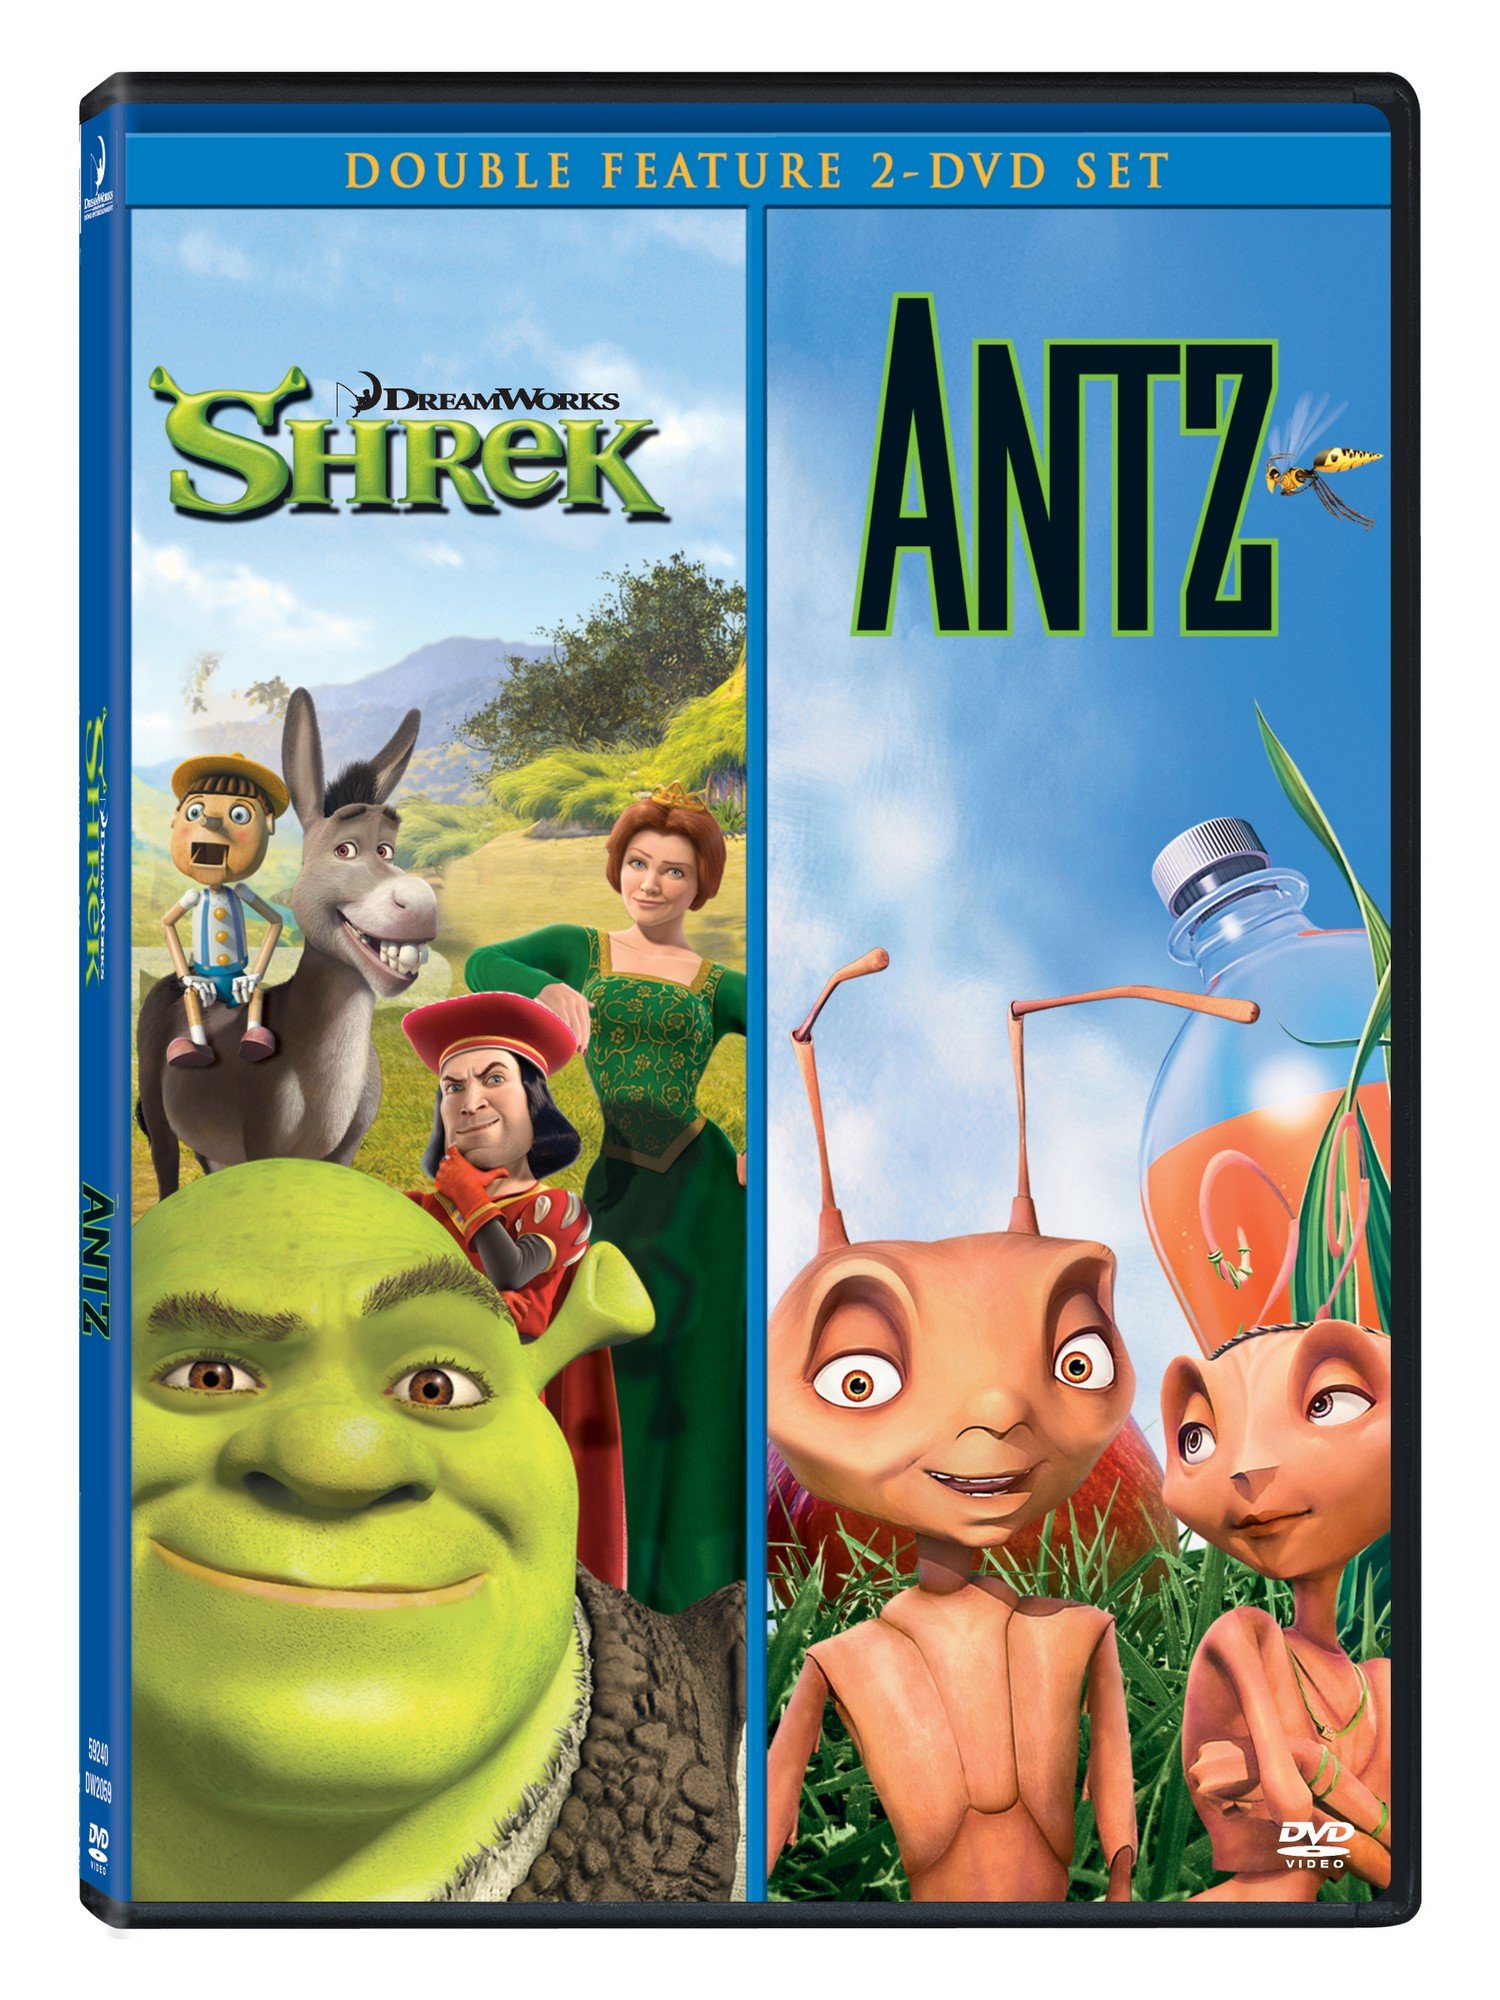 2-animation-movies-collection-shrek-antz-movie-purchase-or-watch-on